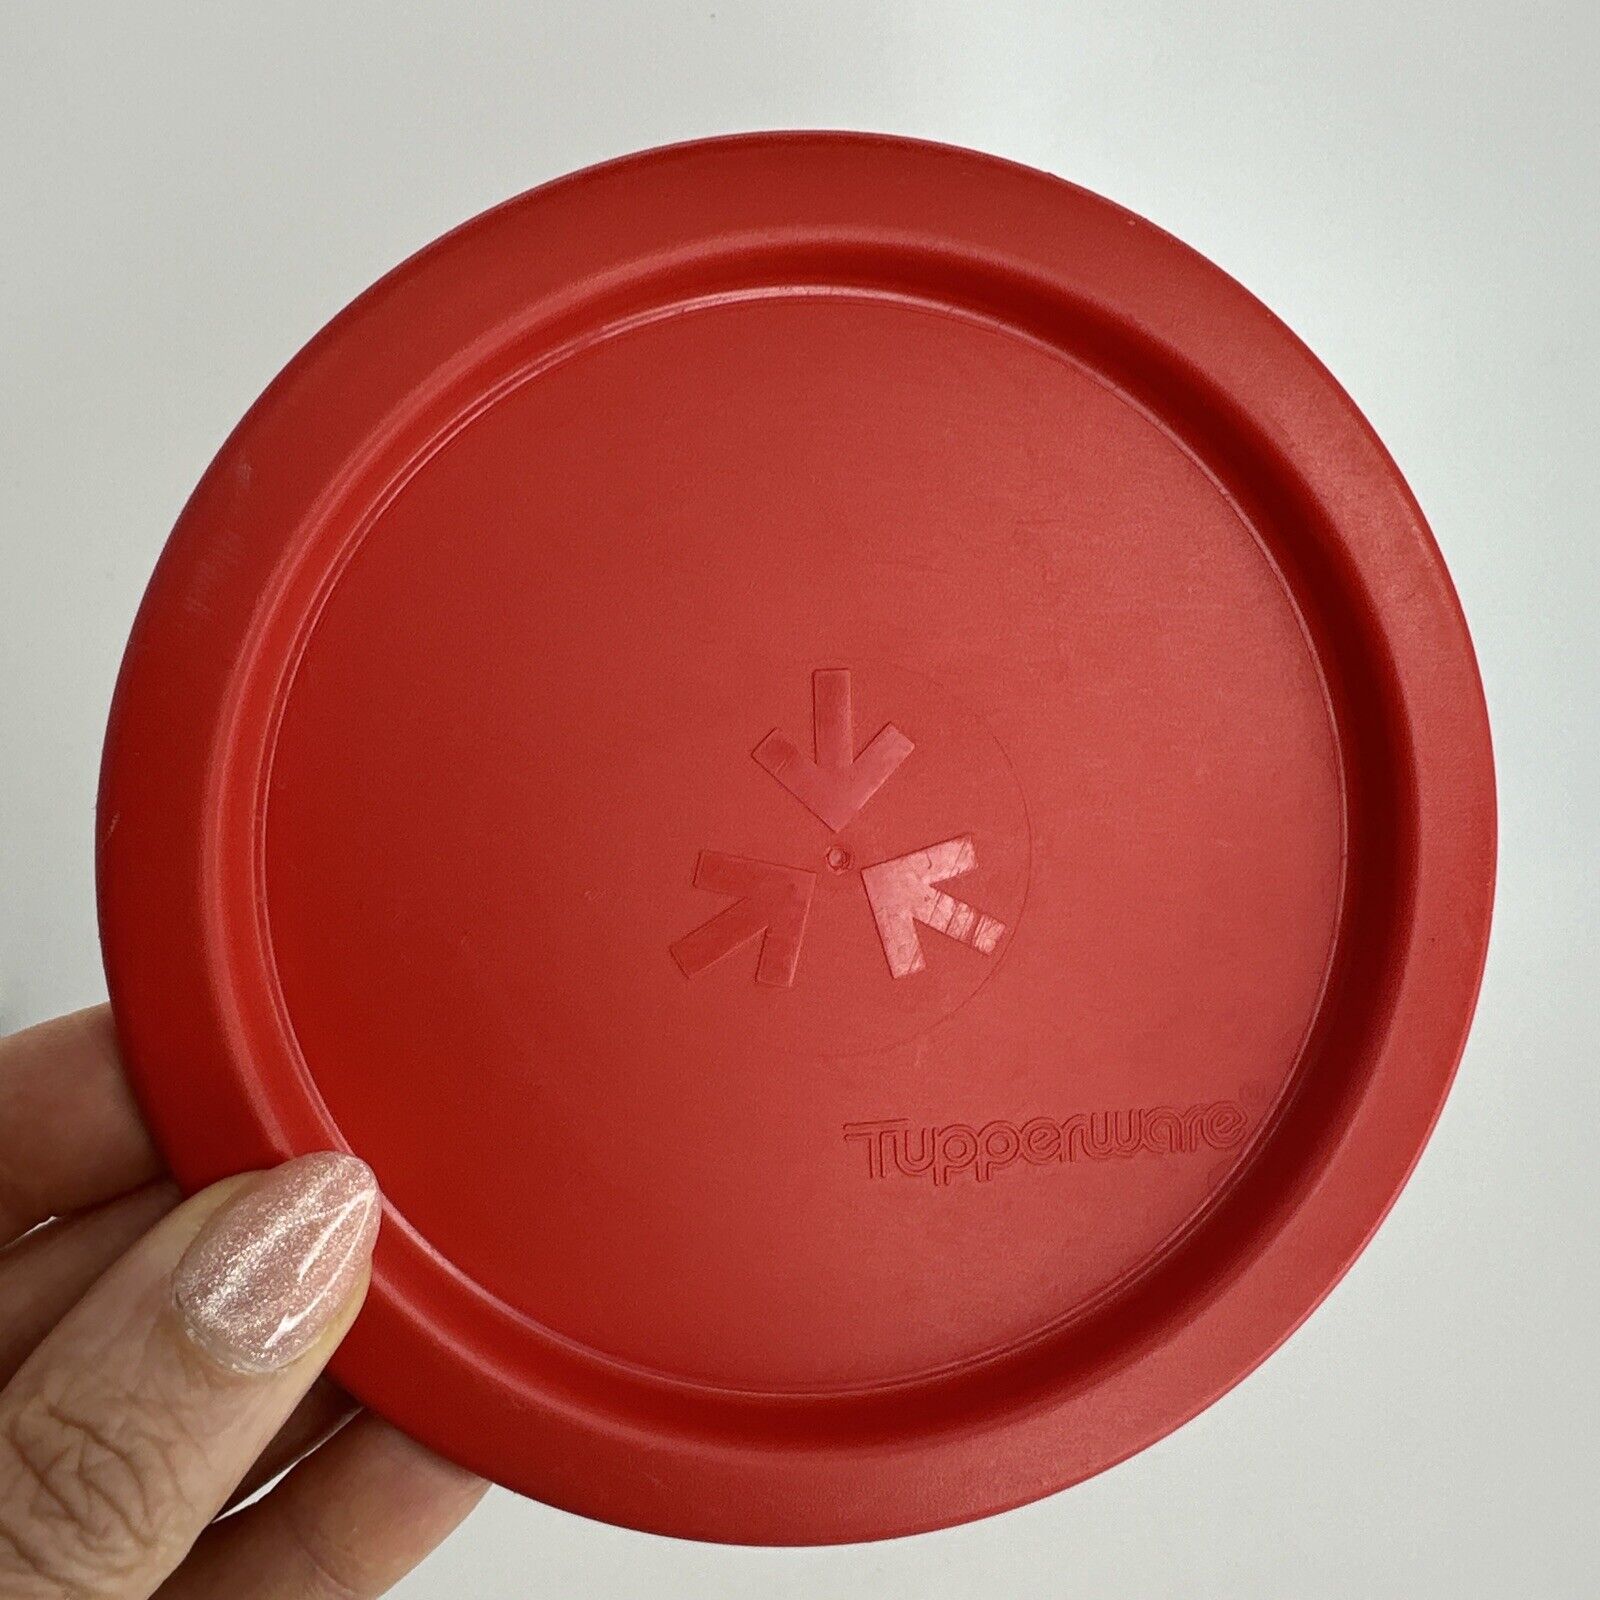 Tupperware One Touch Canister #2423 \